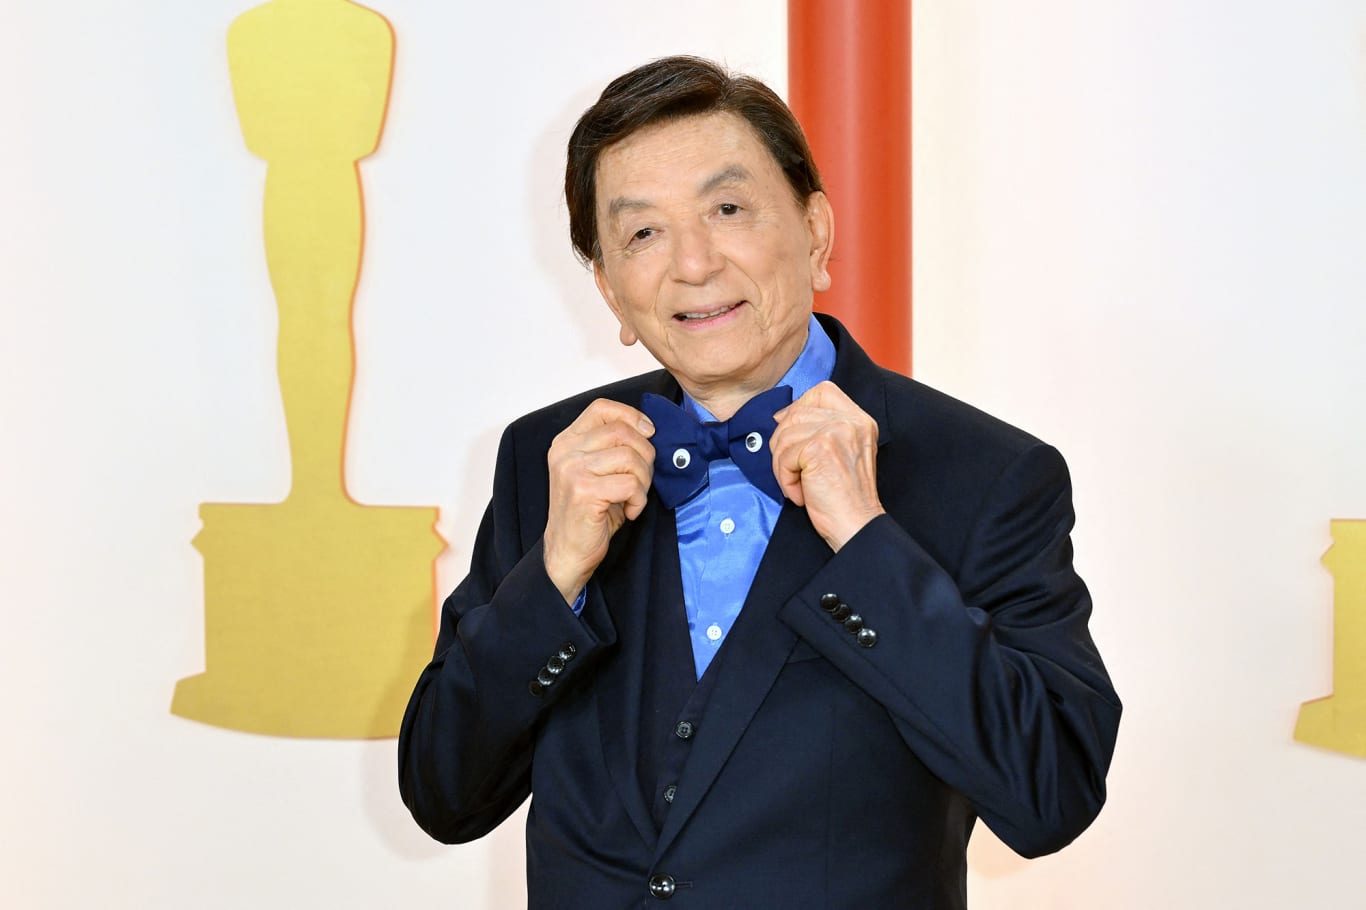 James Hong arrived wearing one of the night's boldest accessories: a blue bowtie adorned with — in a nod to 